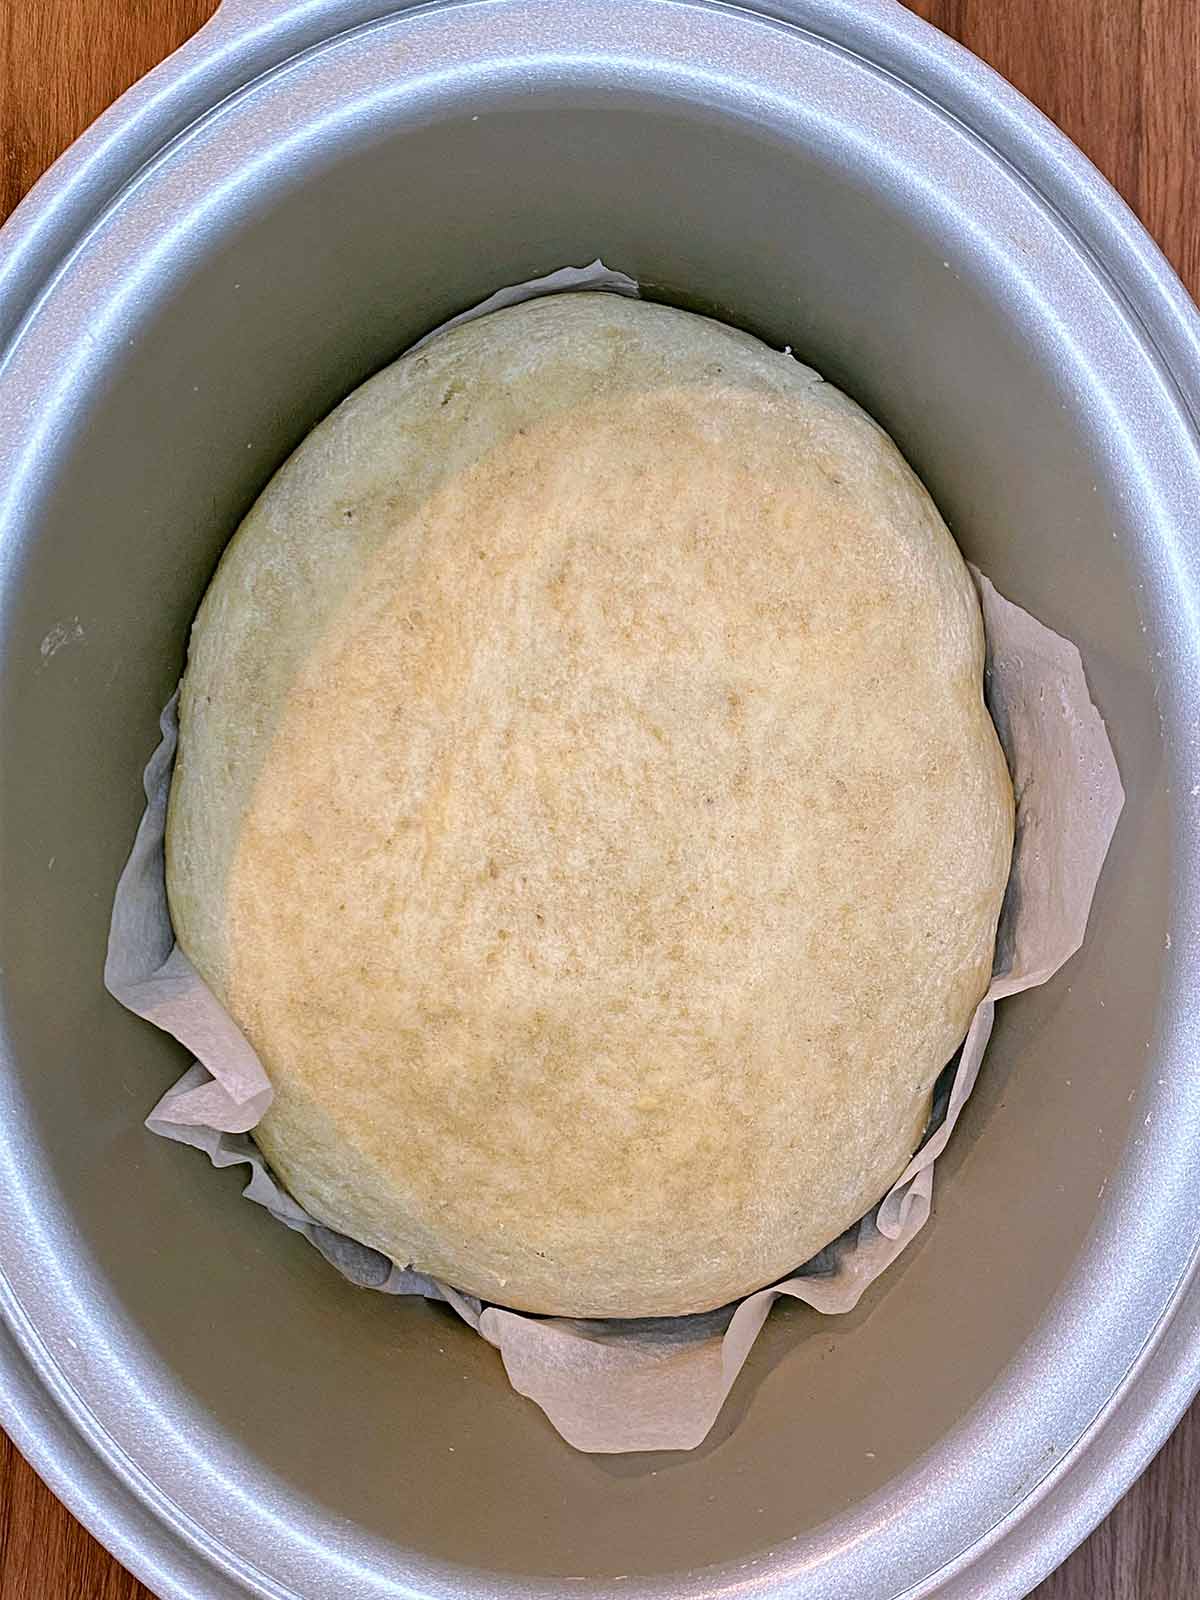 Cooked bread in a slow cooker.